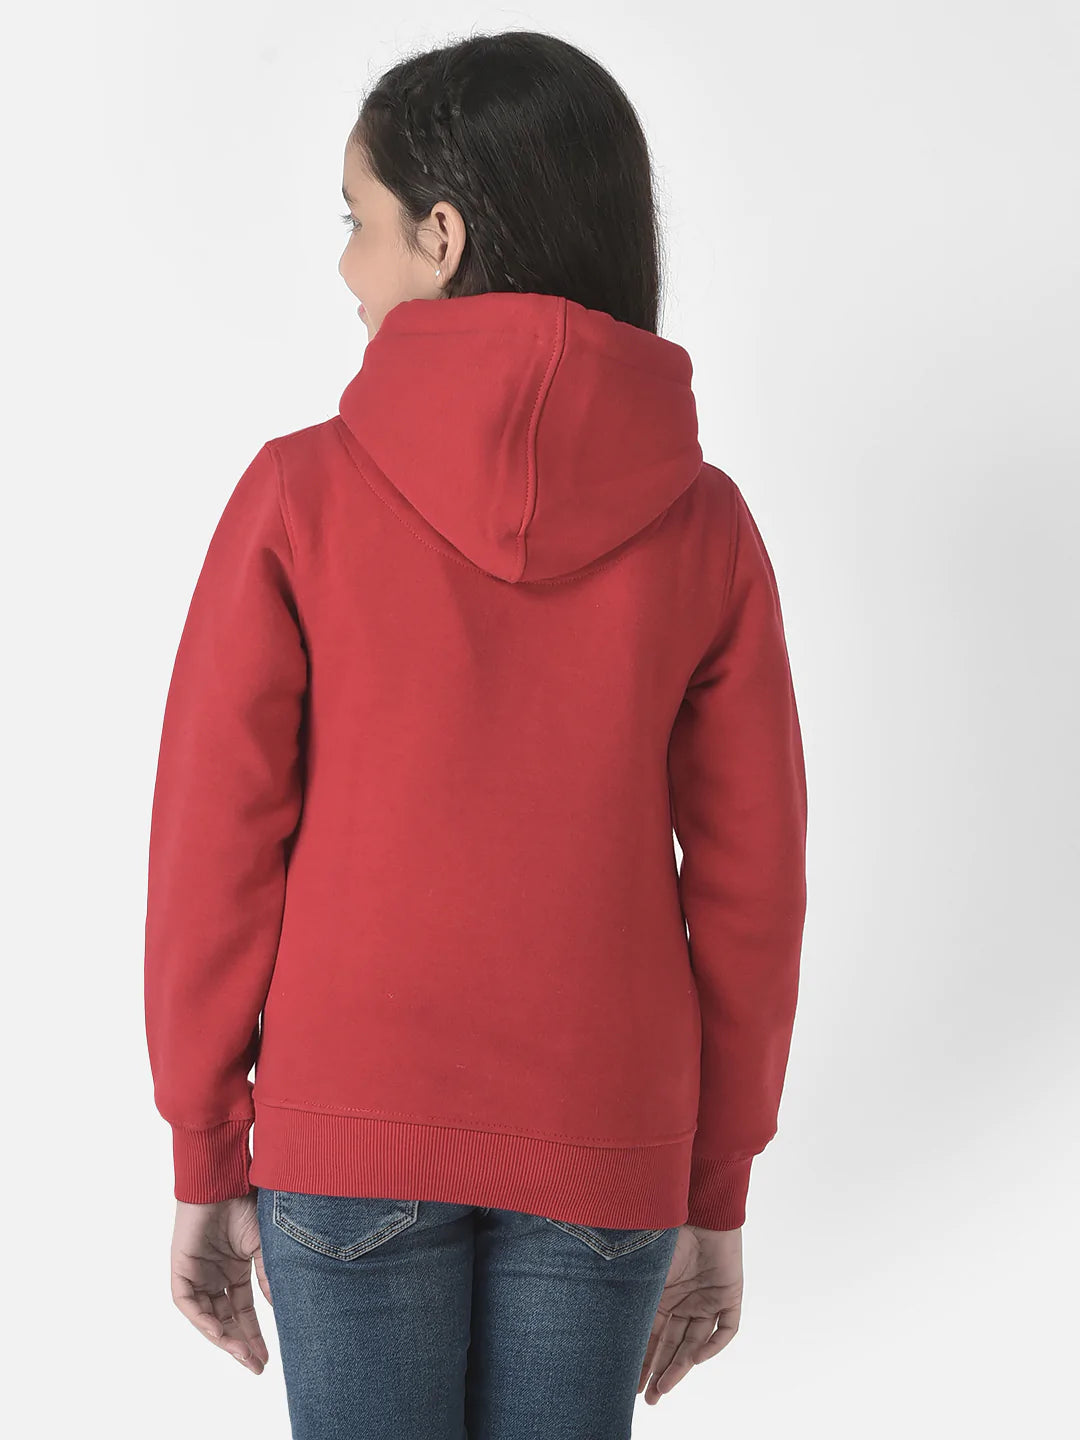  Red Typographic Hoodie